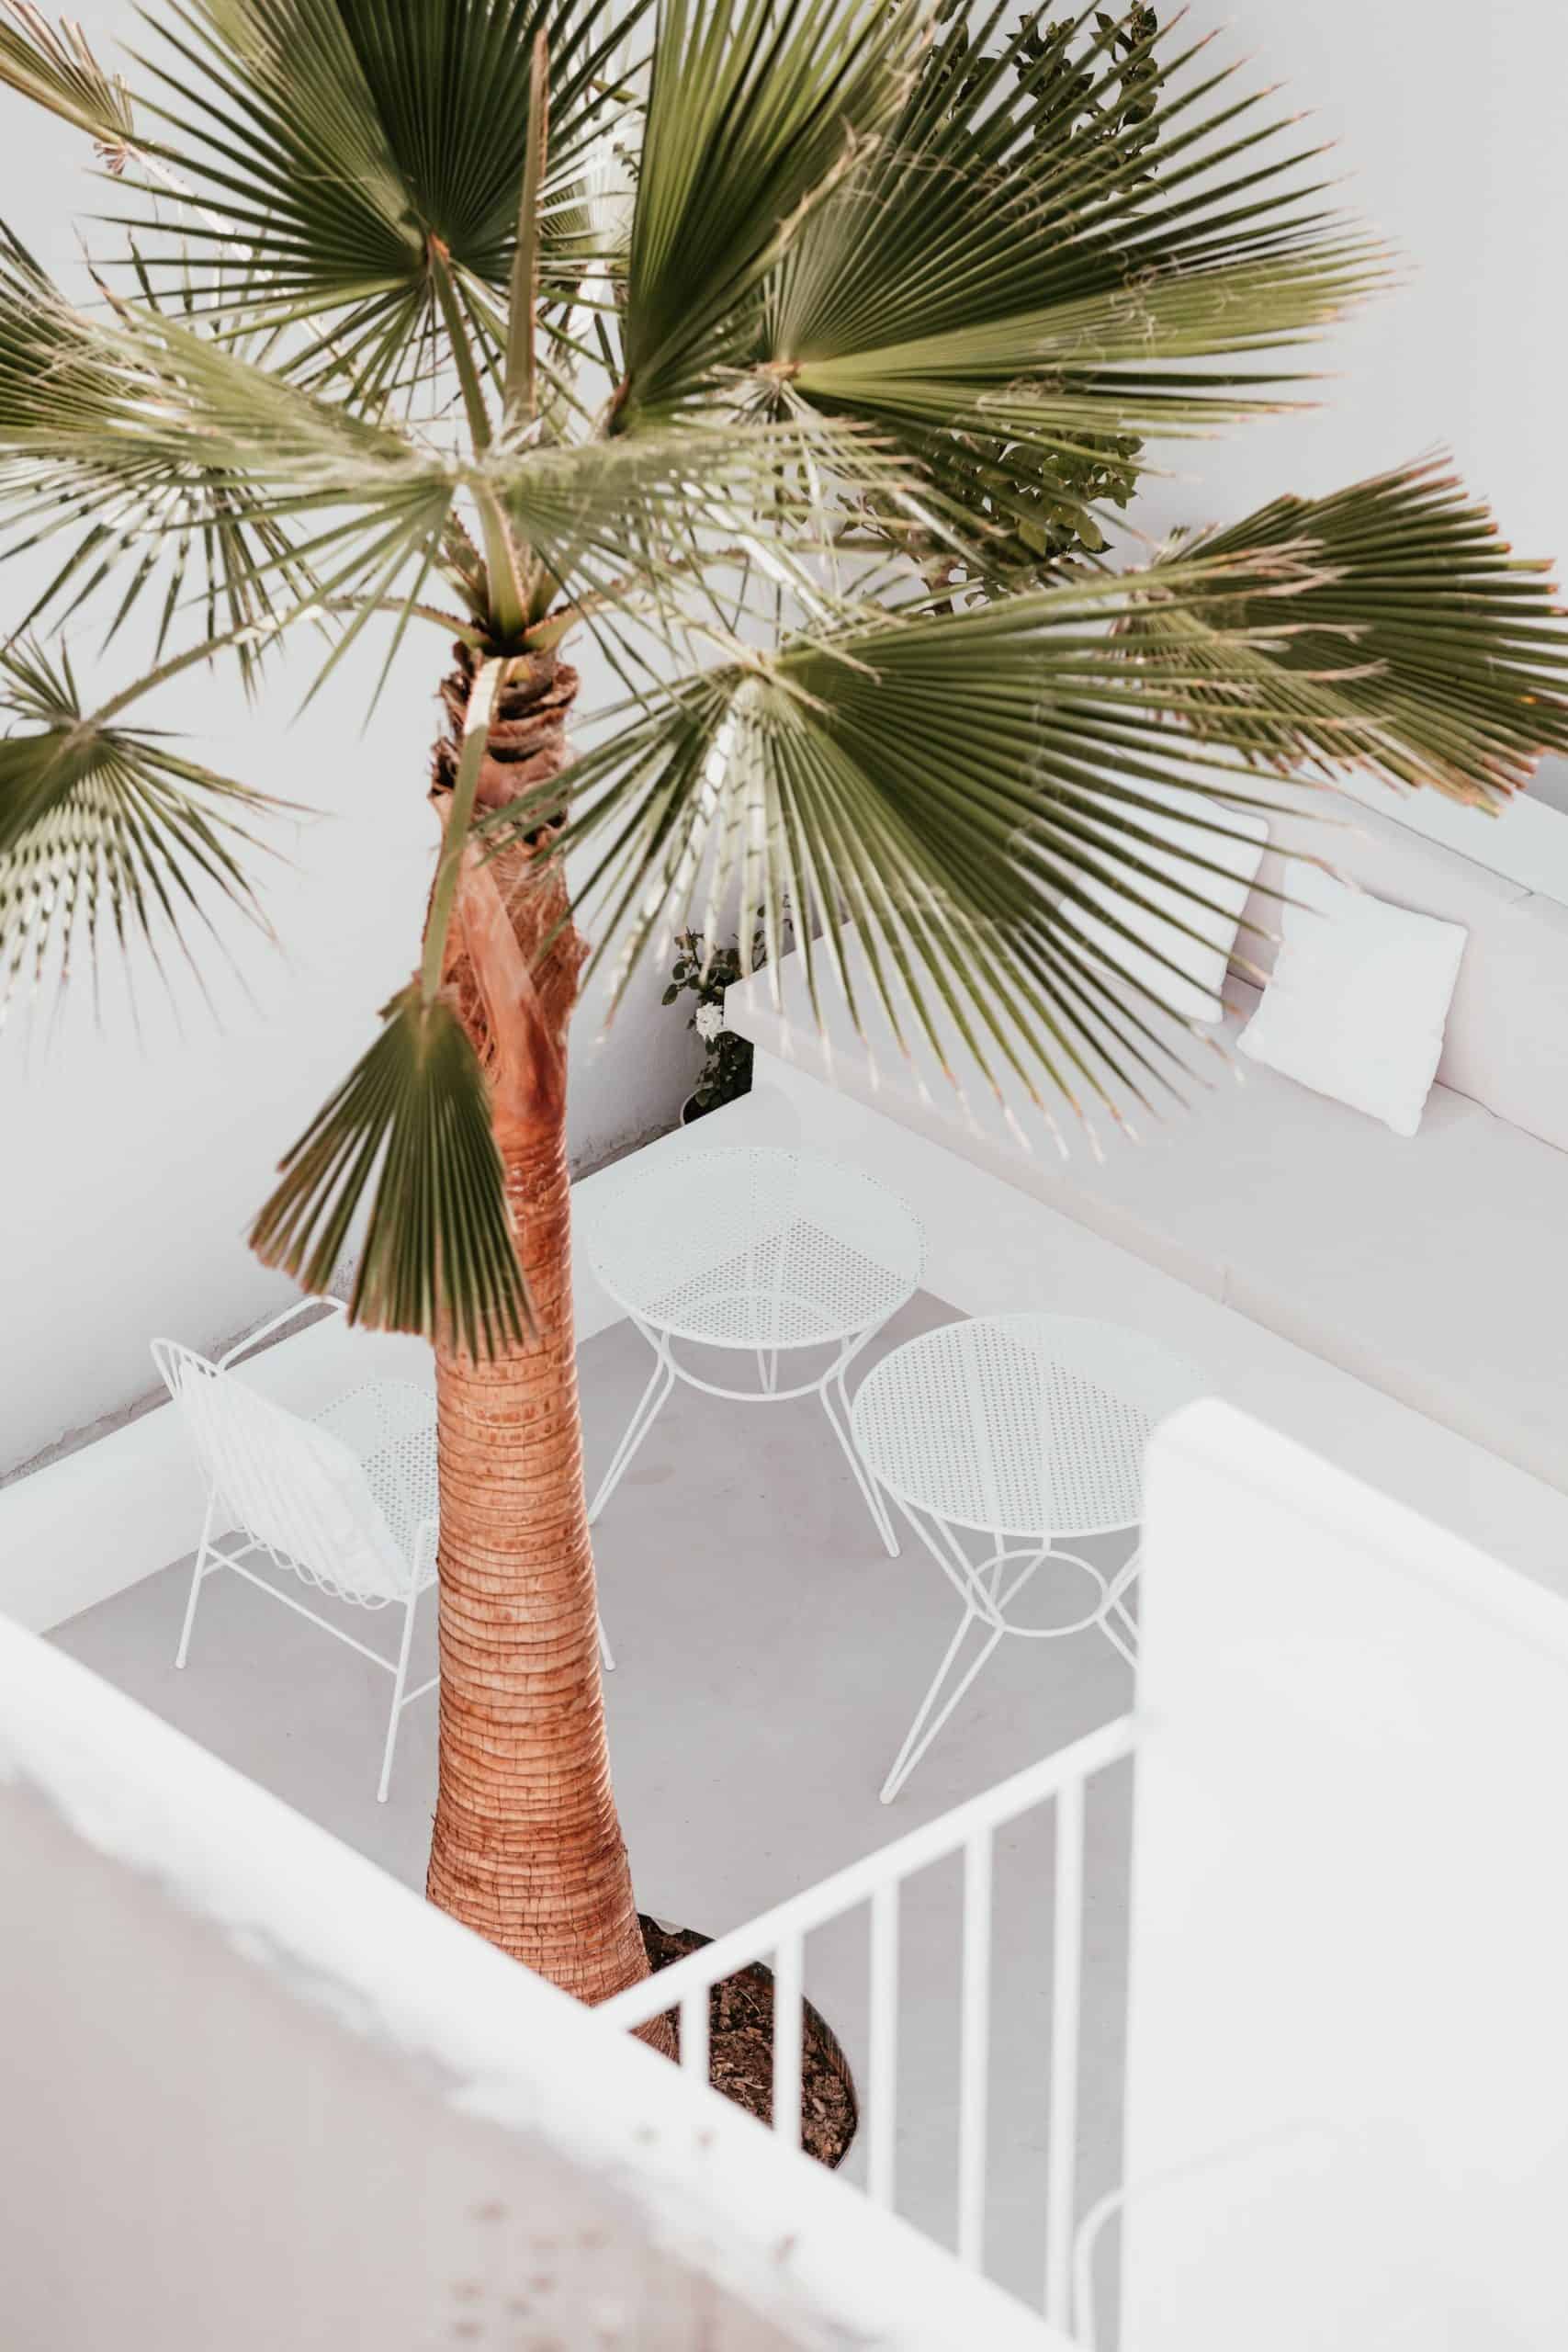 Is it possible to grow a palm tree on the balcony?